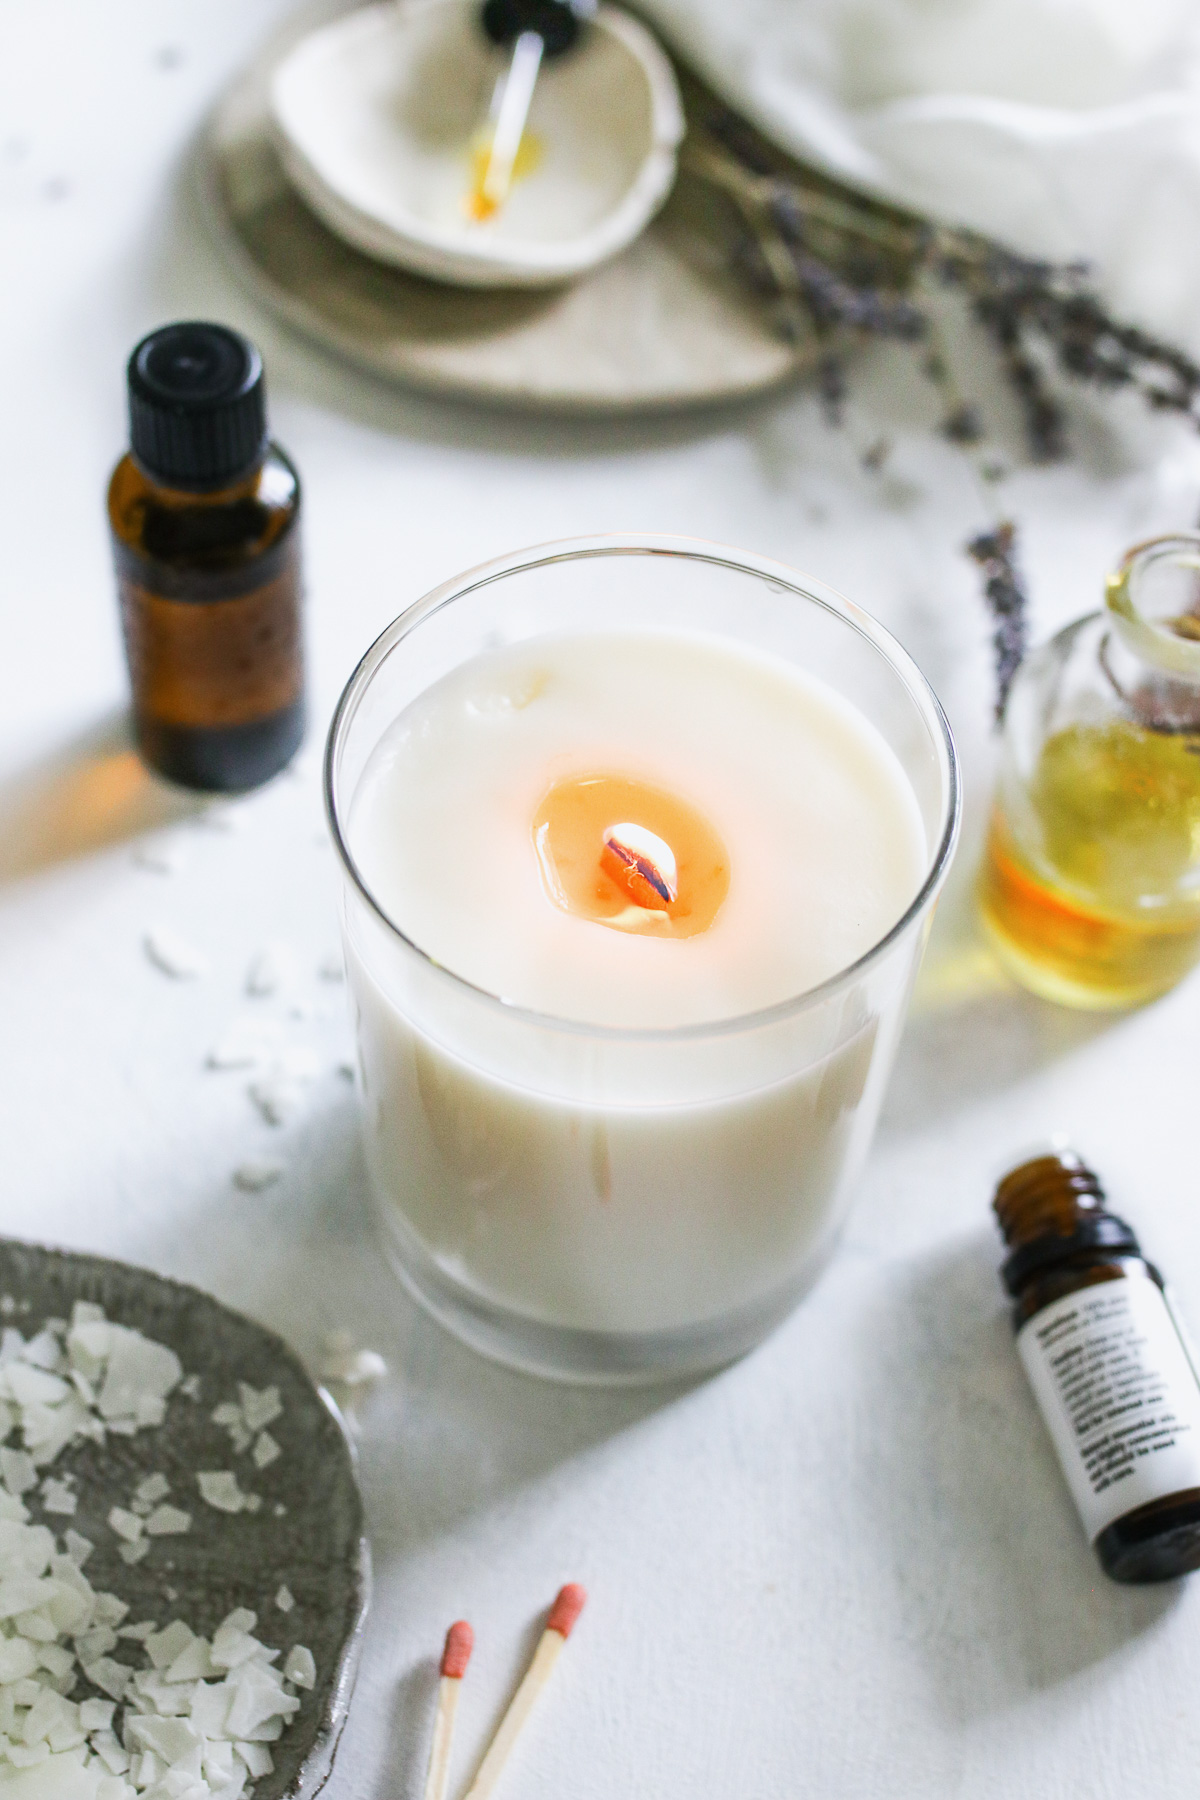 How to Make Scented Oils